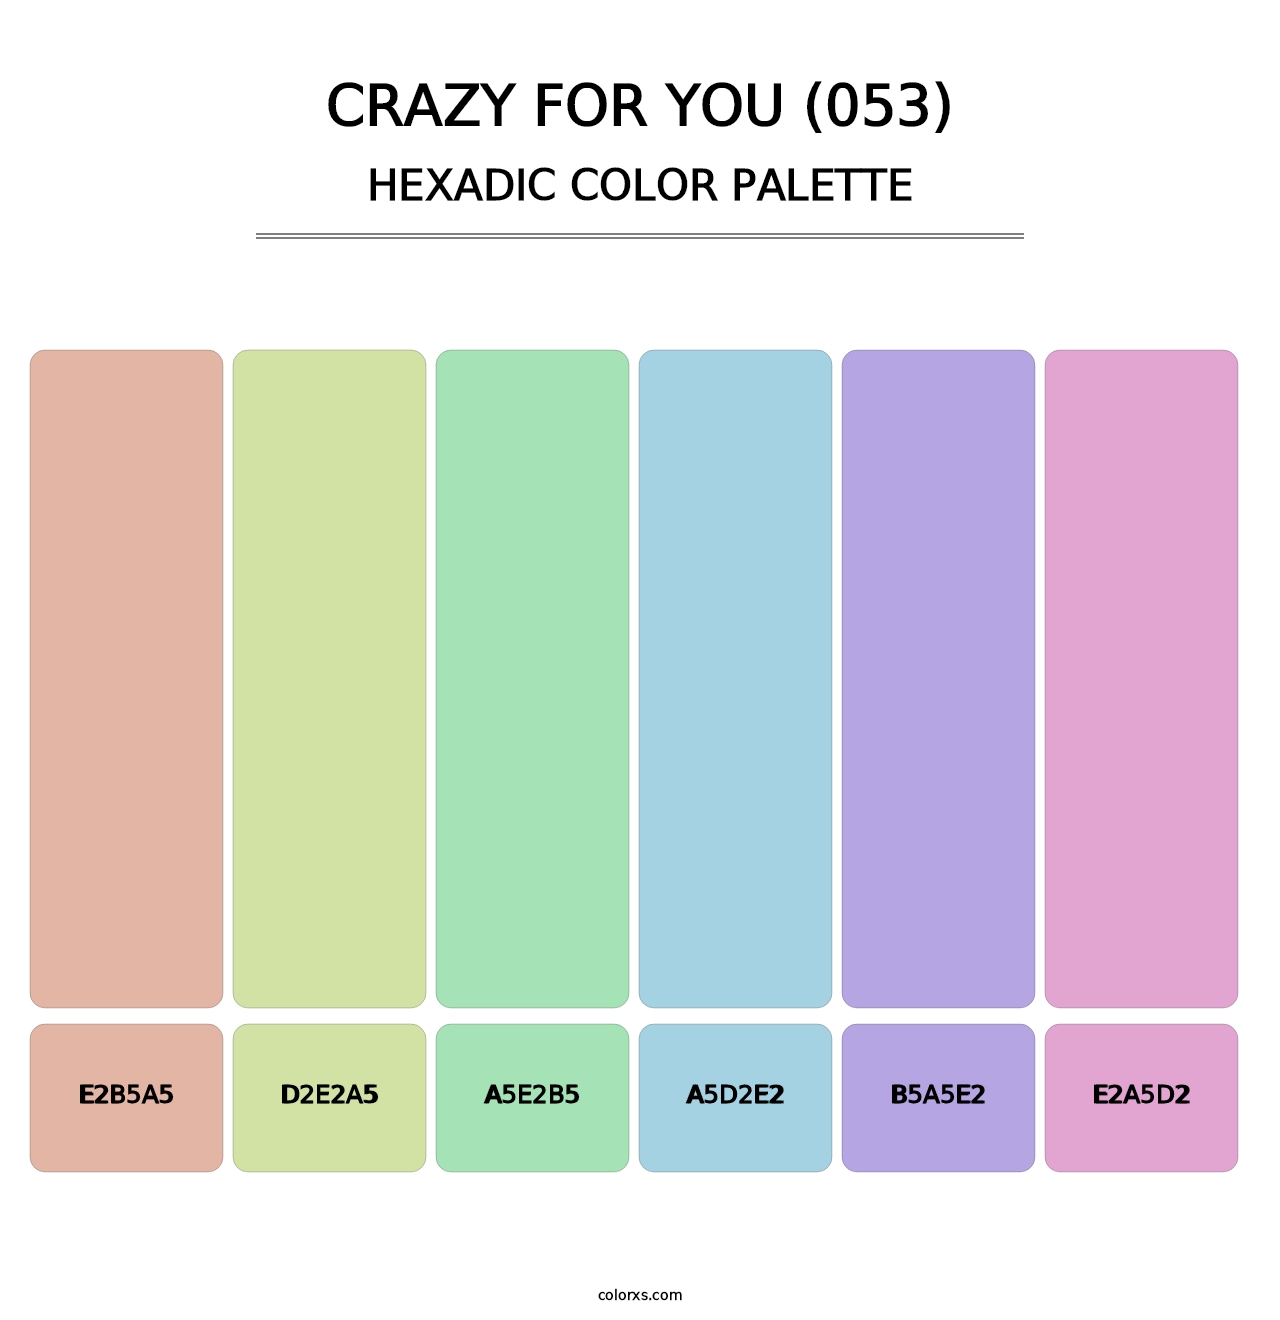 Crazy For You (053) - Hexadic Color Palette